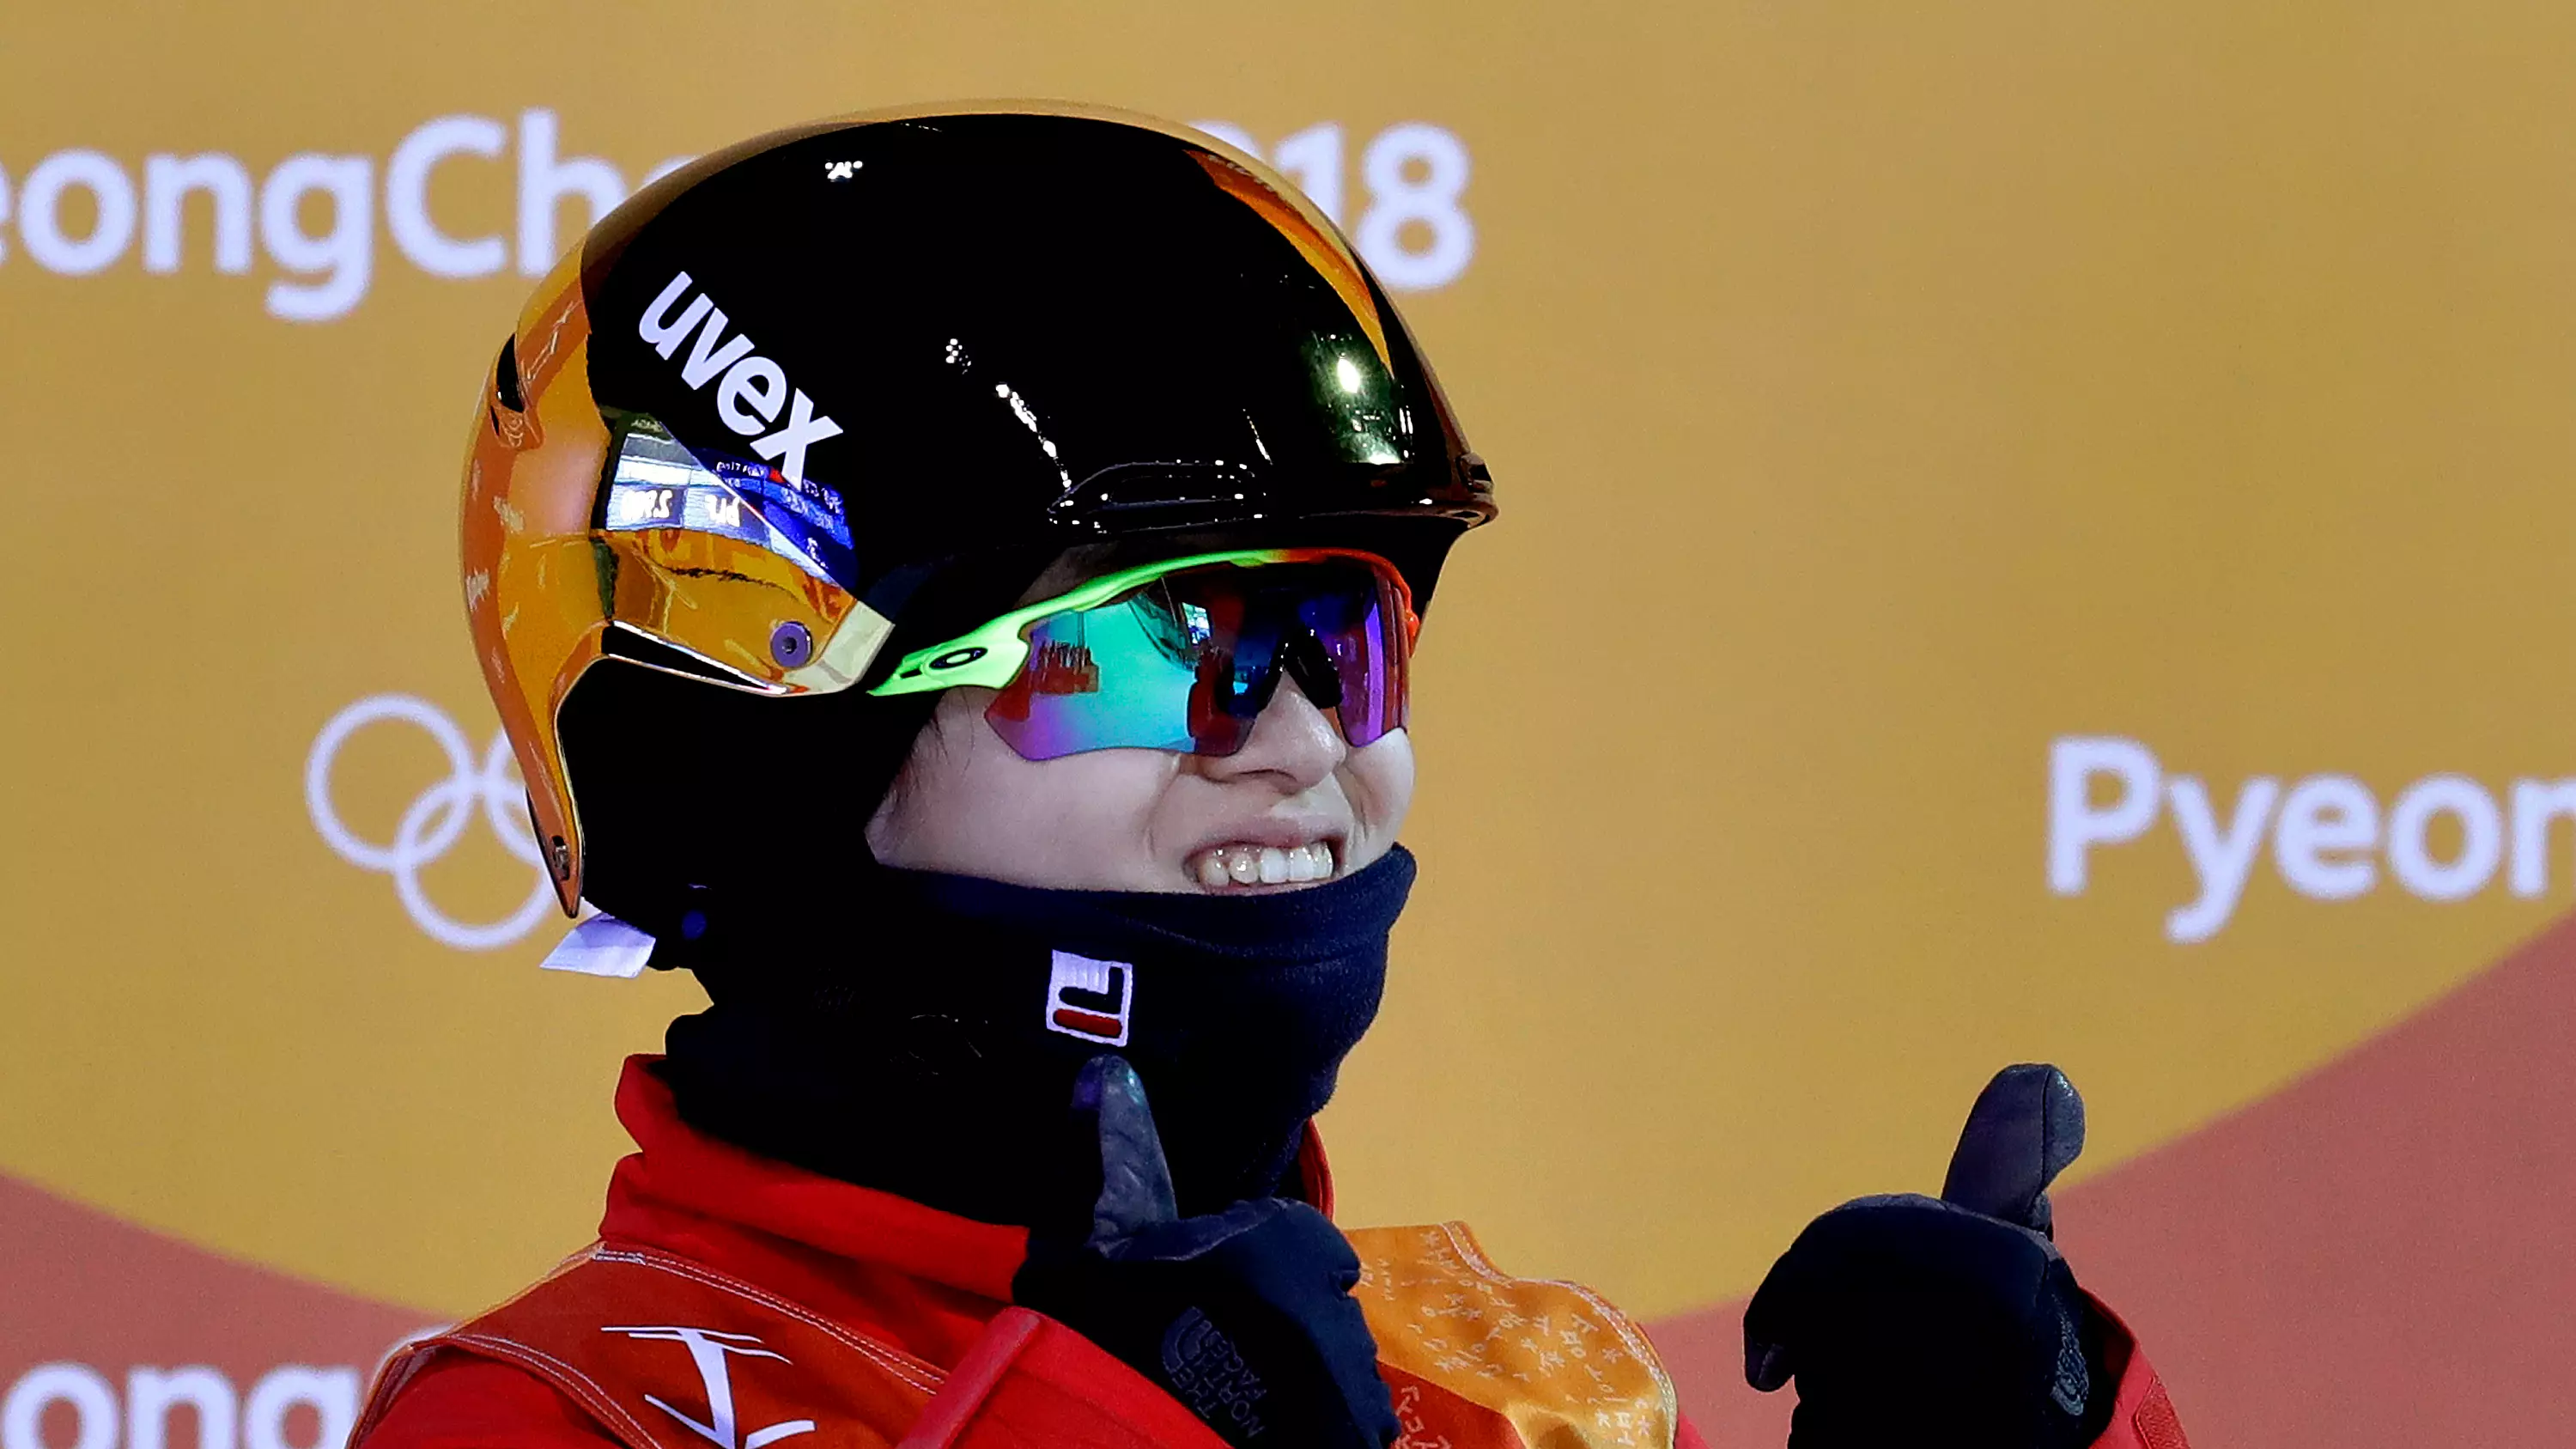 Olympic Commentator Says All Chinese Skiers 'Look The Same'